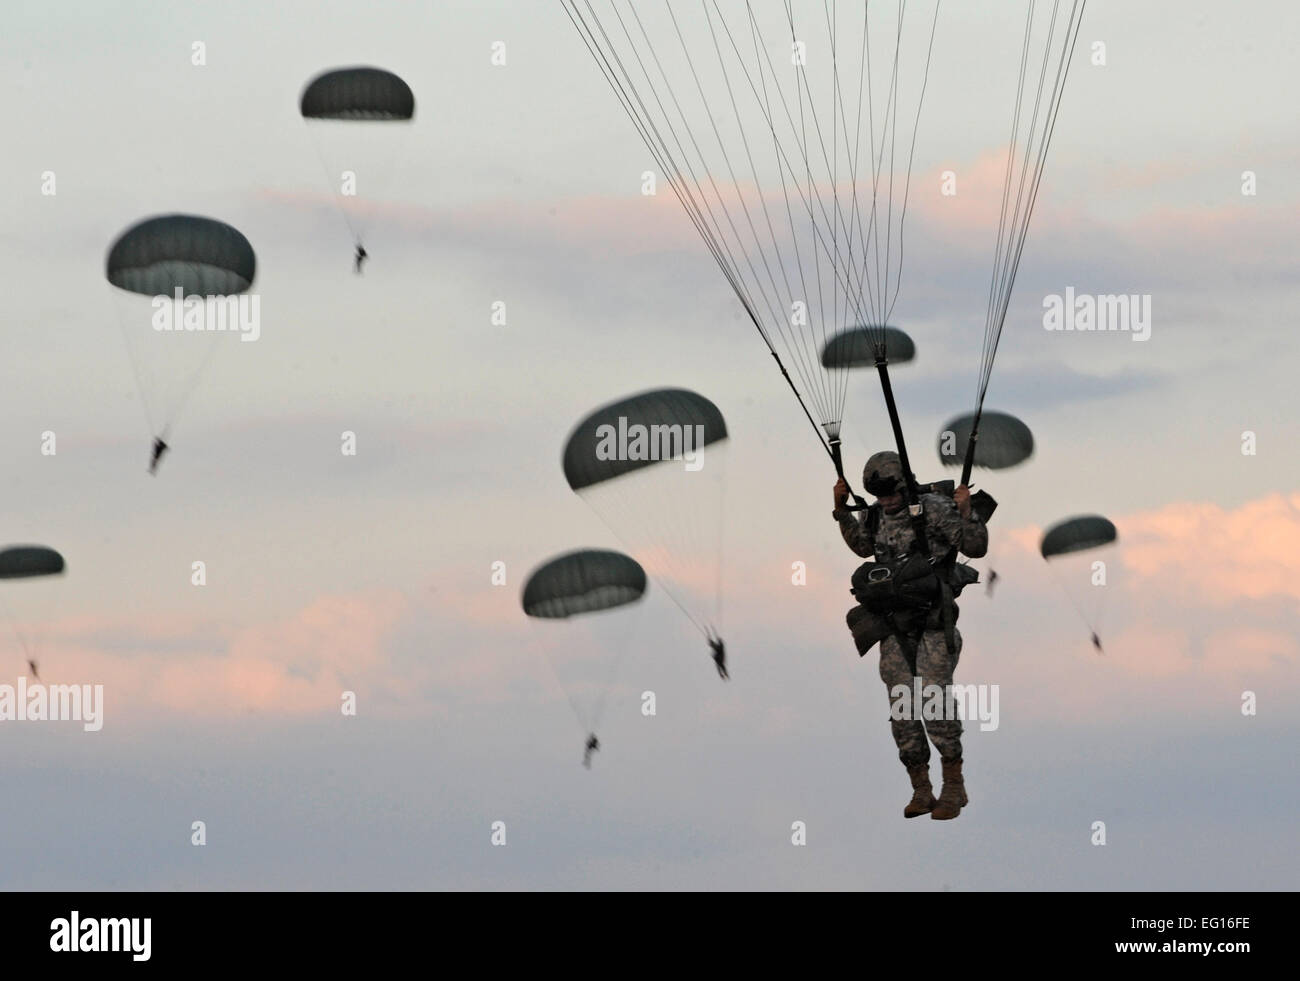 Army Soldiers from the 82nd Airborne Division parachute after jumping from a C-130 Hercules during Airborne Operations at Fort Bragg, N.C. Staff Sgt. Elizabeth Rissmiller Stock Photo